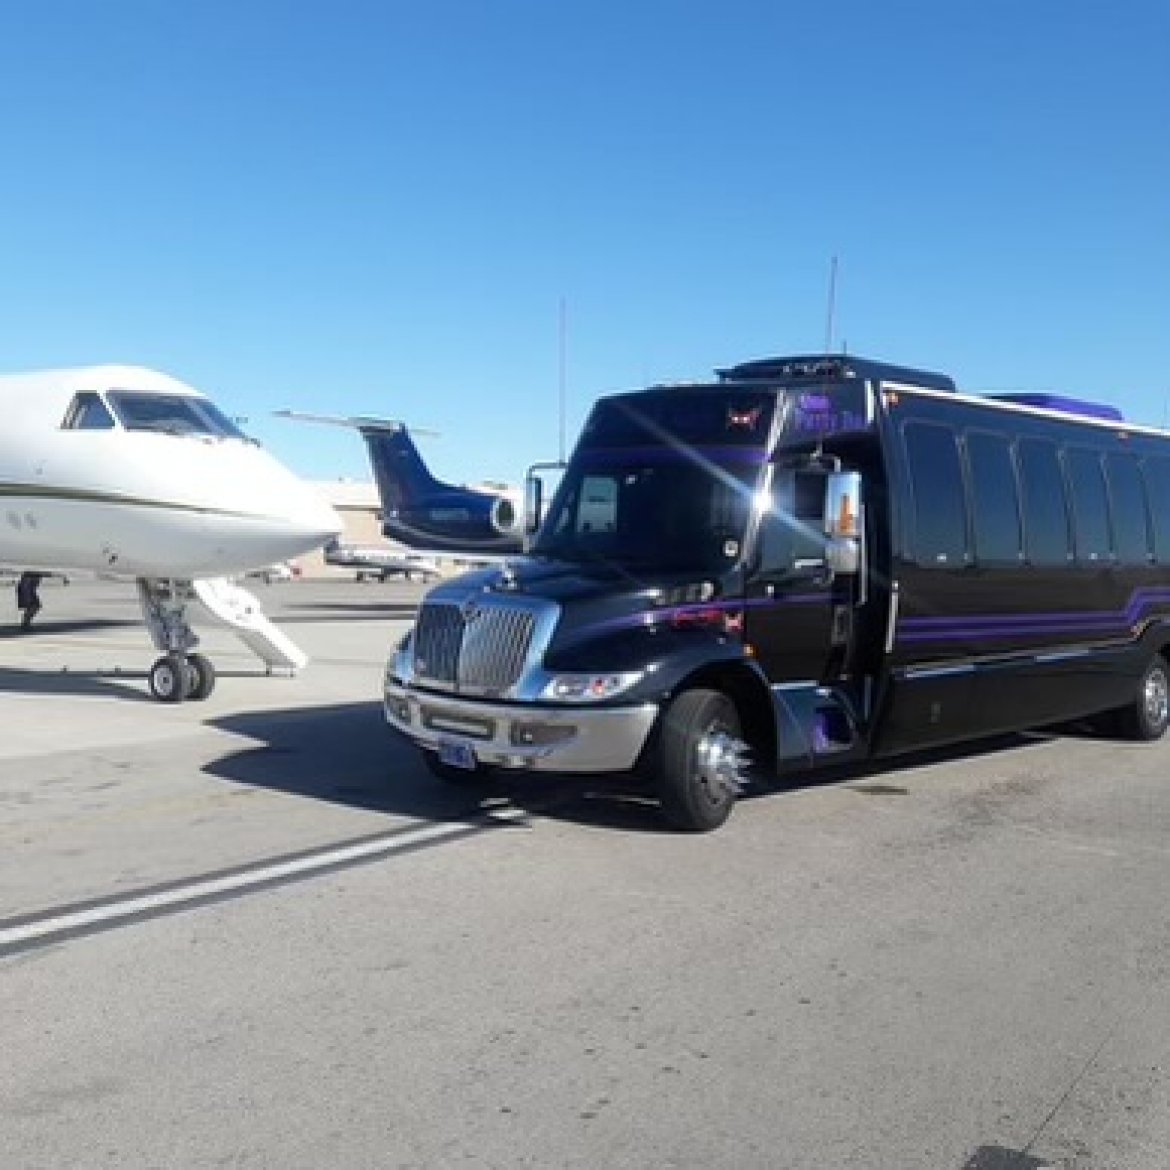 Limo Bus for sale: 2005 International 3200